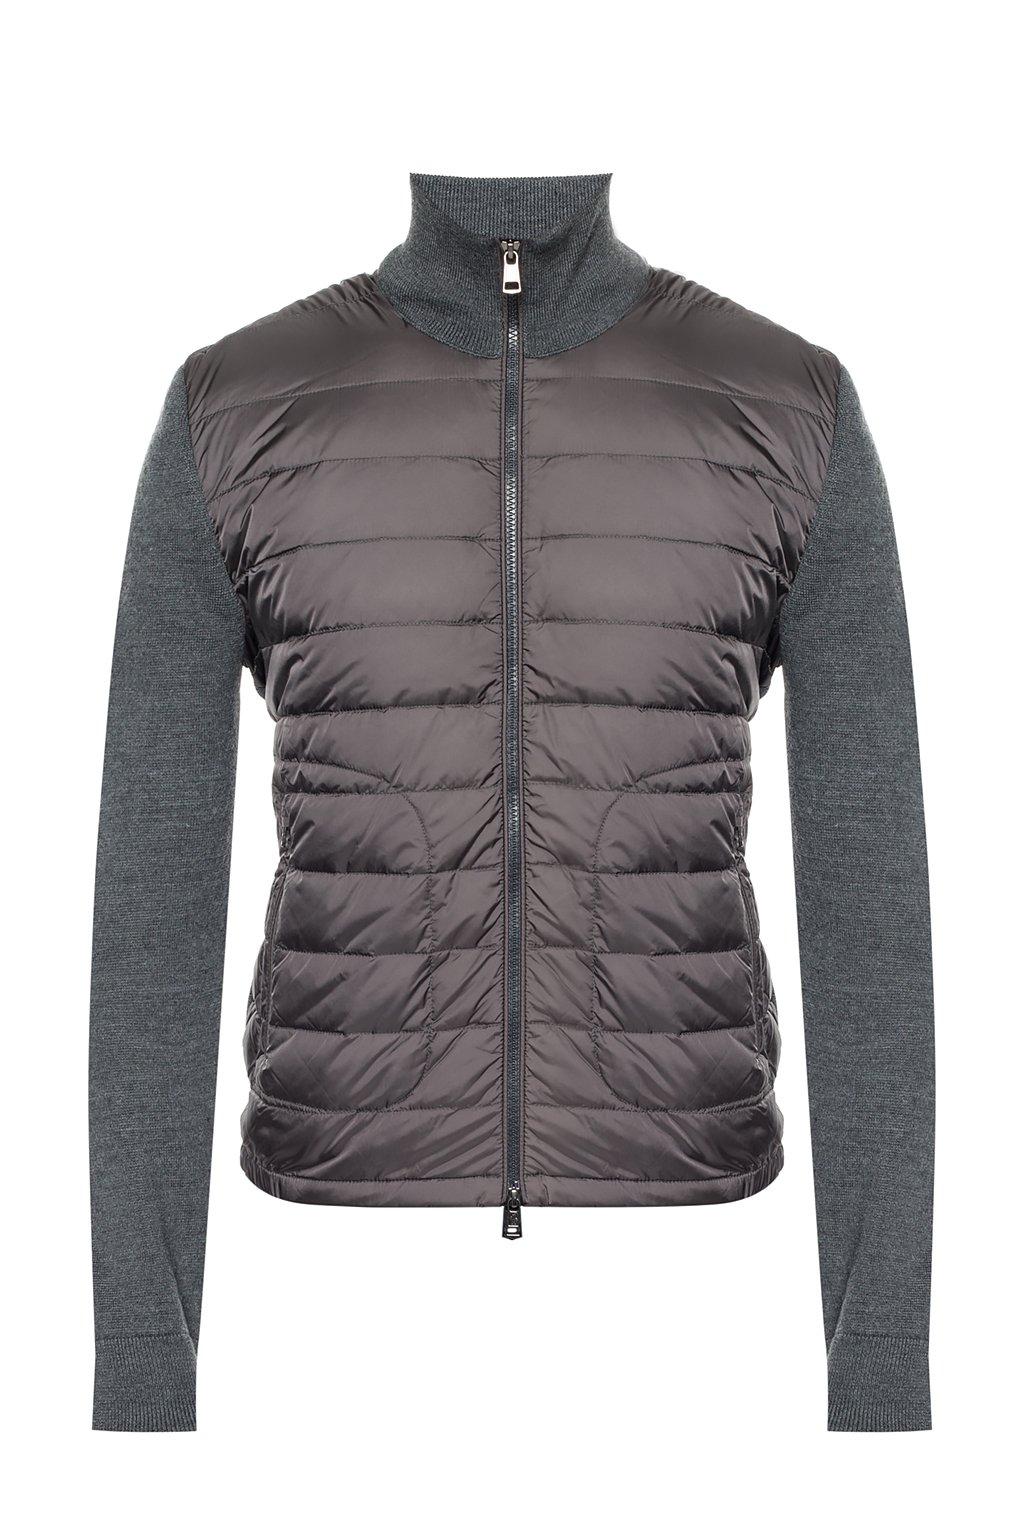 Moncler Synthetic Sweater With Jacket Motif in Grey (Gray) for Men - Lyst